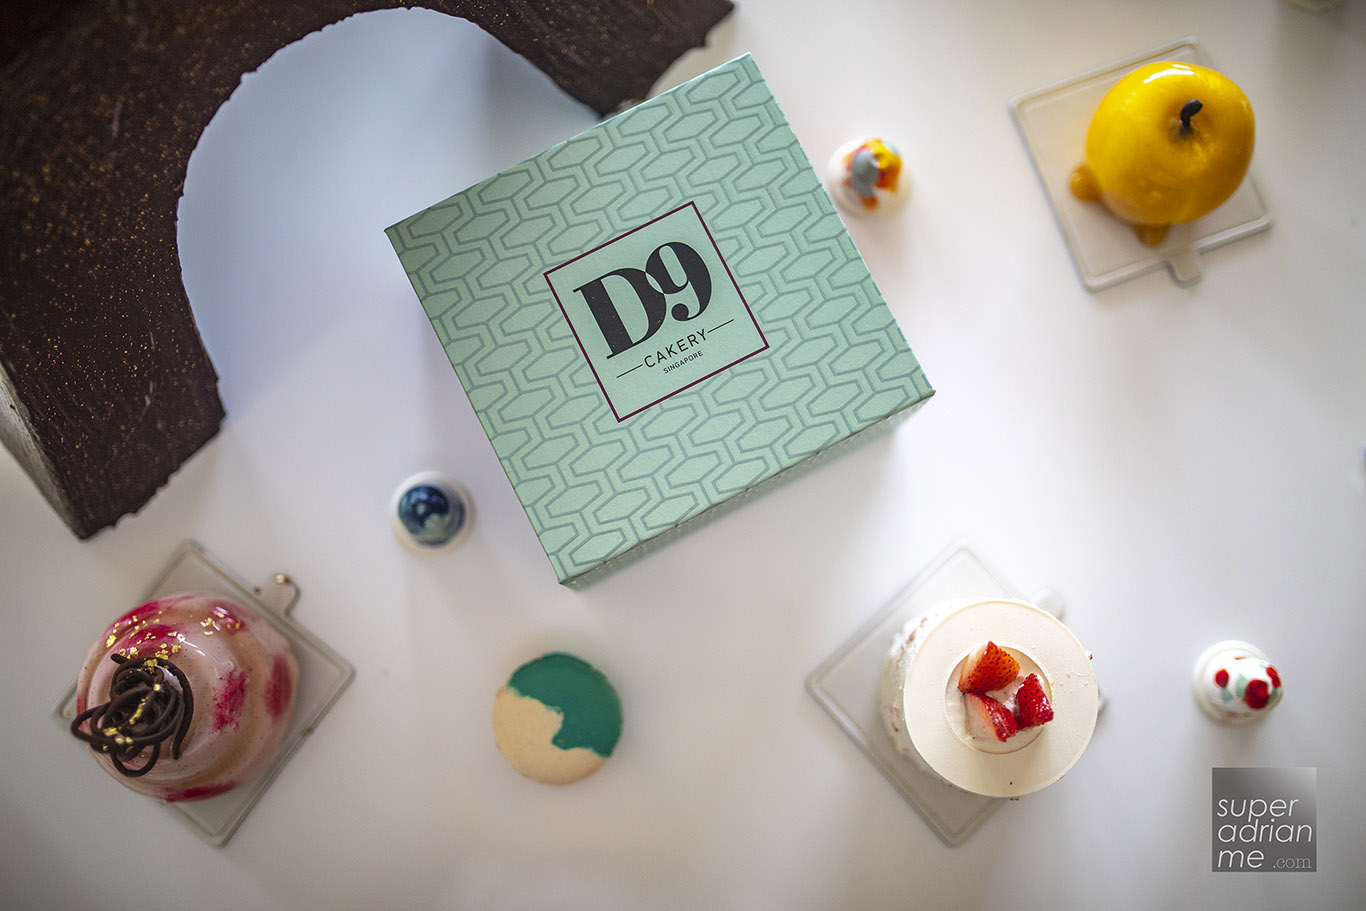 New desserts from Hilton Singapore's D9 Cakery